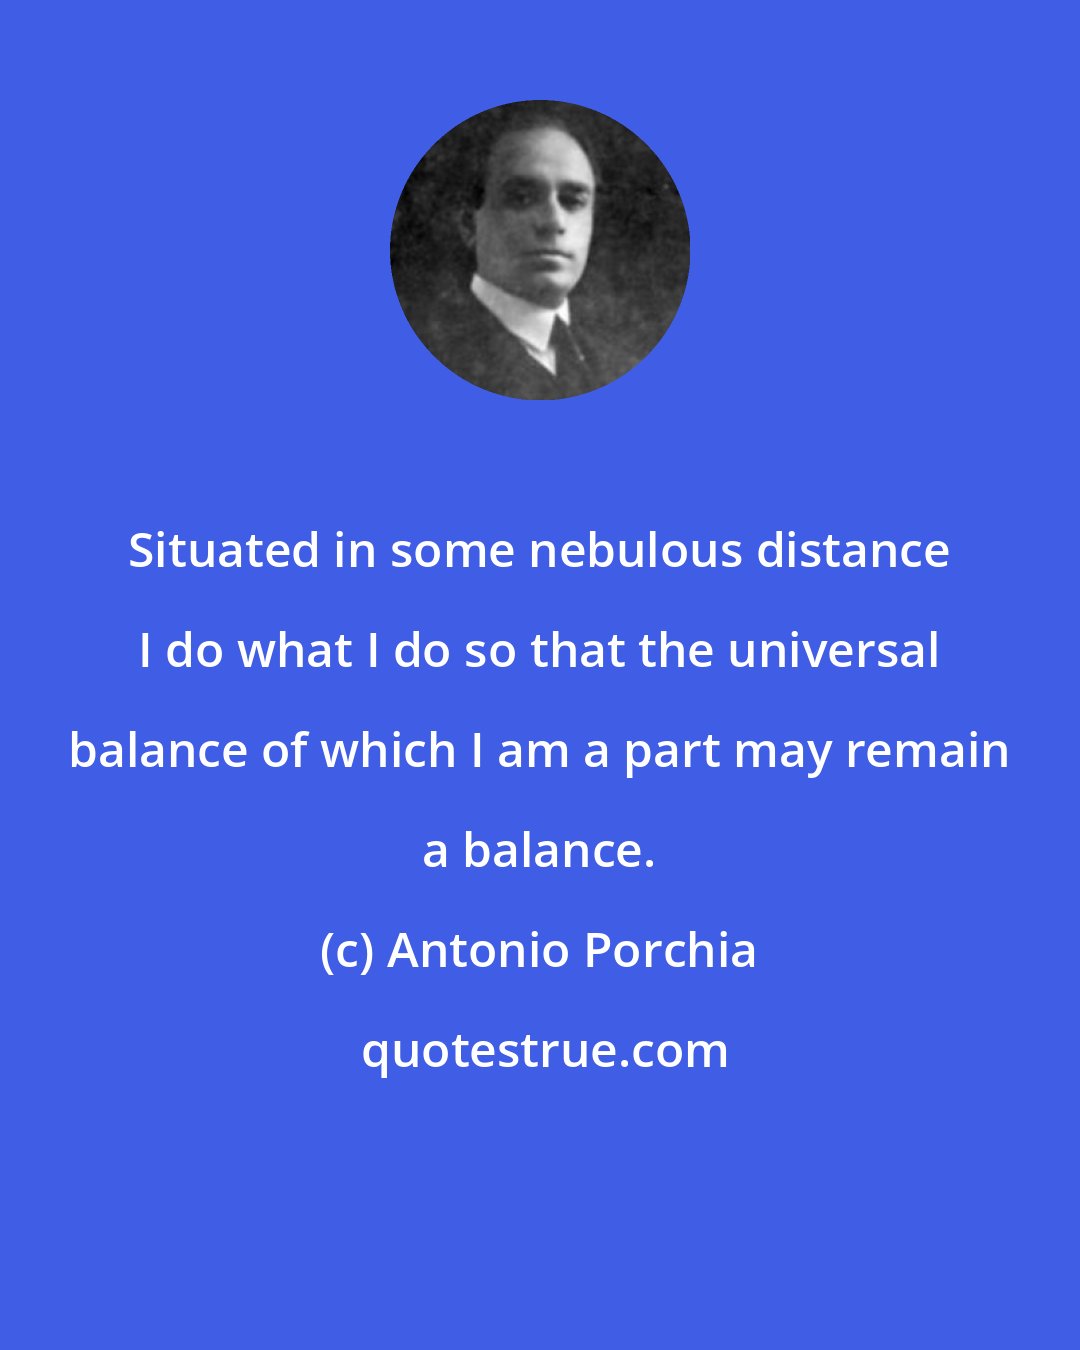 Antonio Porchia: Situated in some nebulous distance I do what I do so that the universal balance of which I am a part may remain a balance.